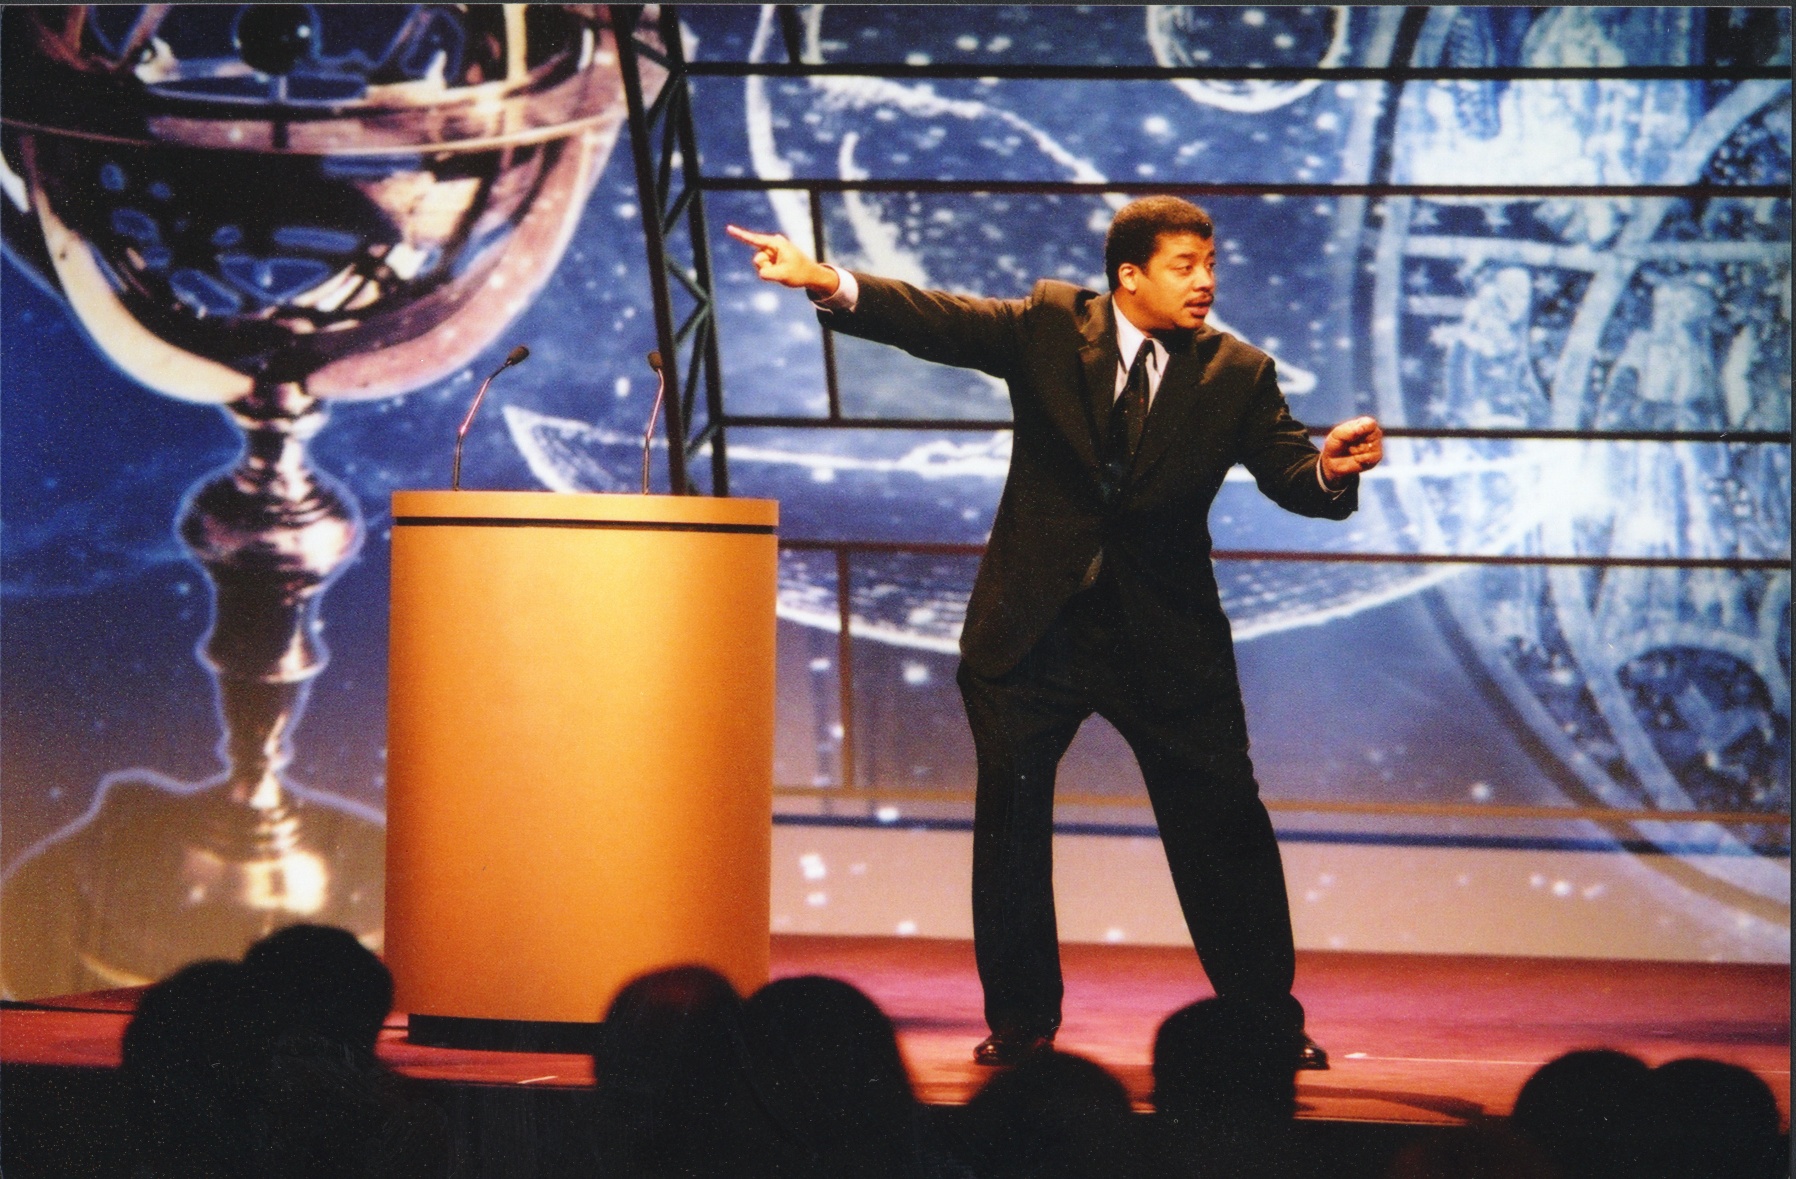 Neil deGrasse Tyson expressively pointing into the air while on stage during a speech.